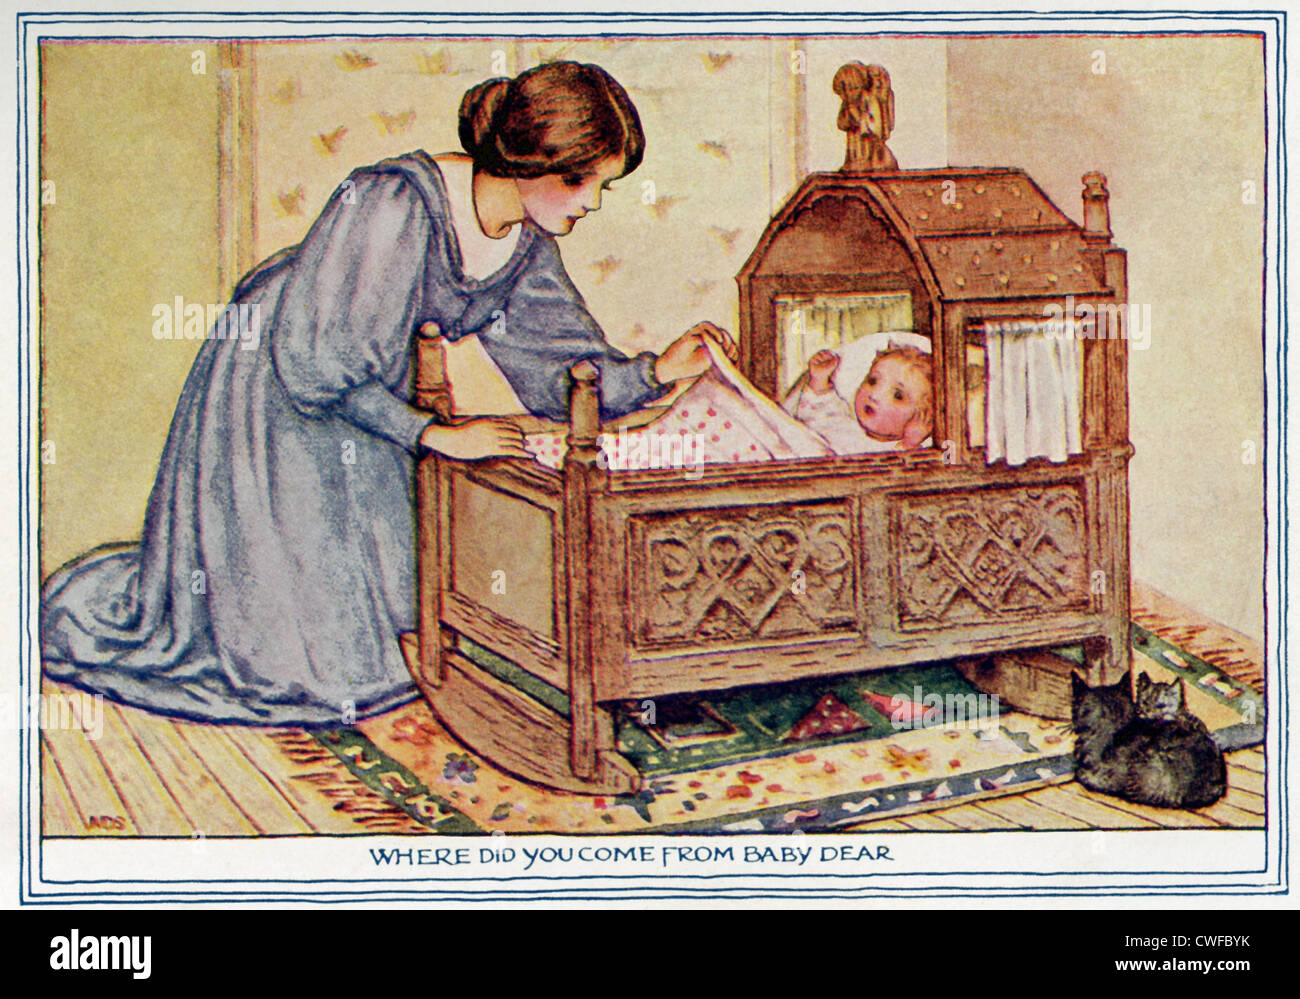 A 1917 illustration of a mother rocking her baby in a cradle, with kittens nearby. Stock Photo